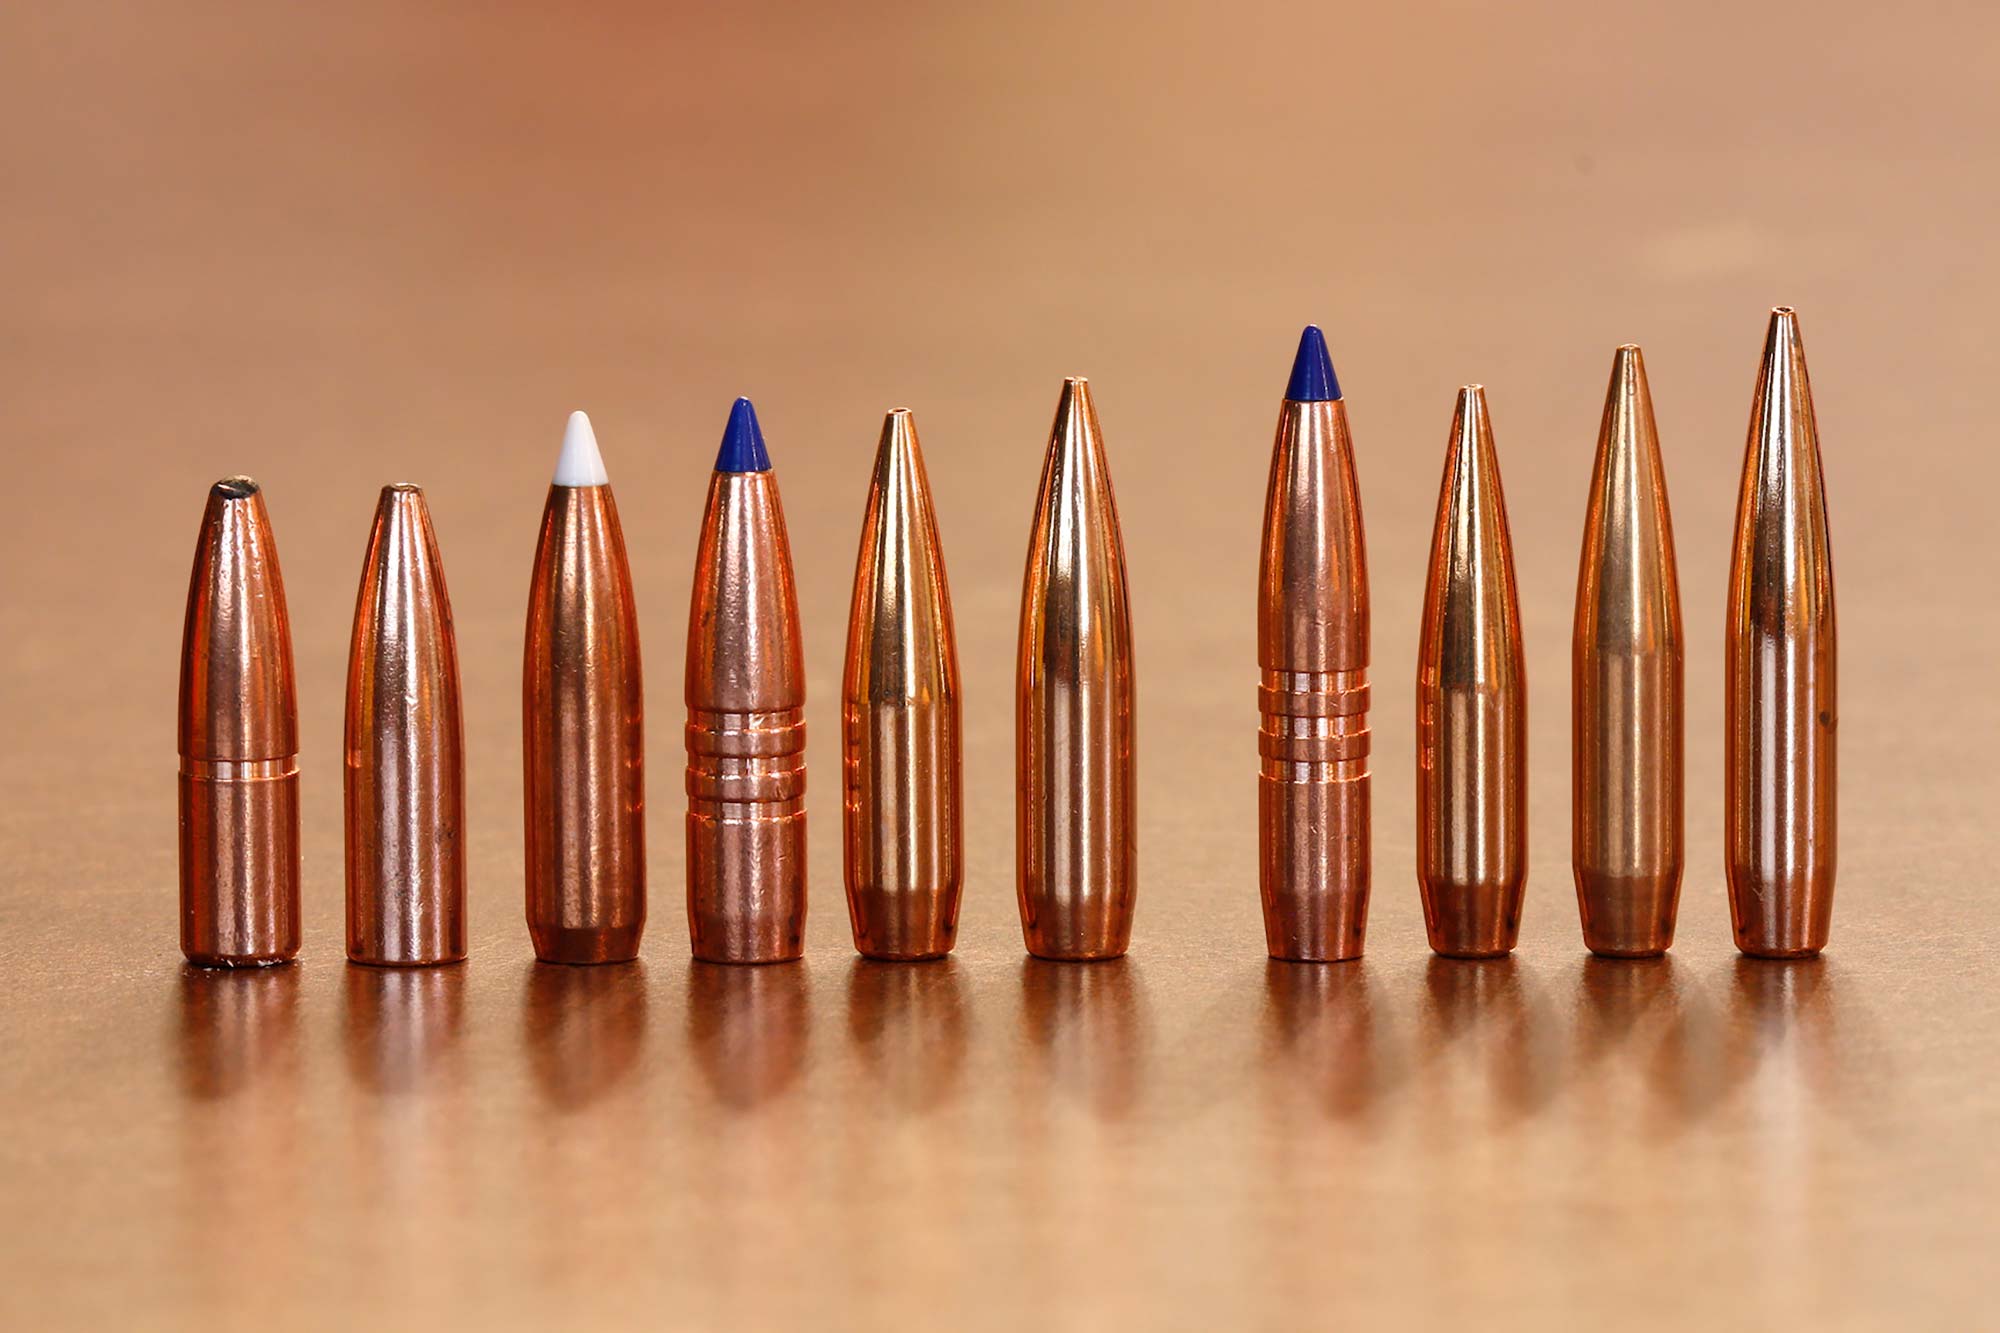 The six .308 bullets on the left don’t appear to look much wider than the four .284 bullets on the right.